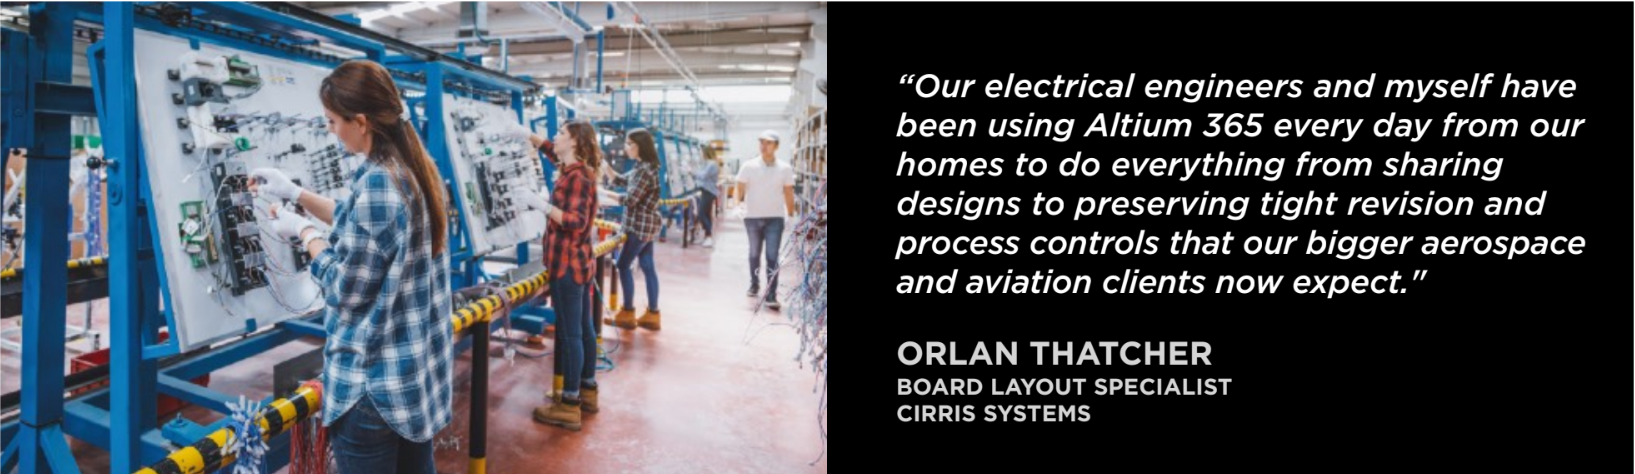 Planning for the Future with Cirris Systems and Altium